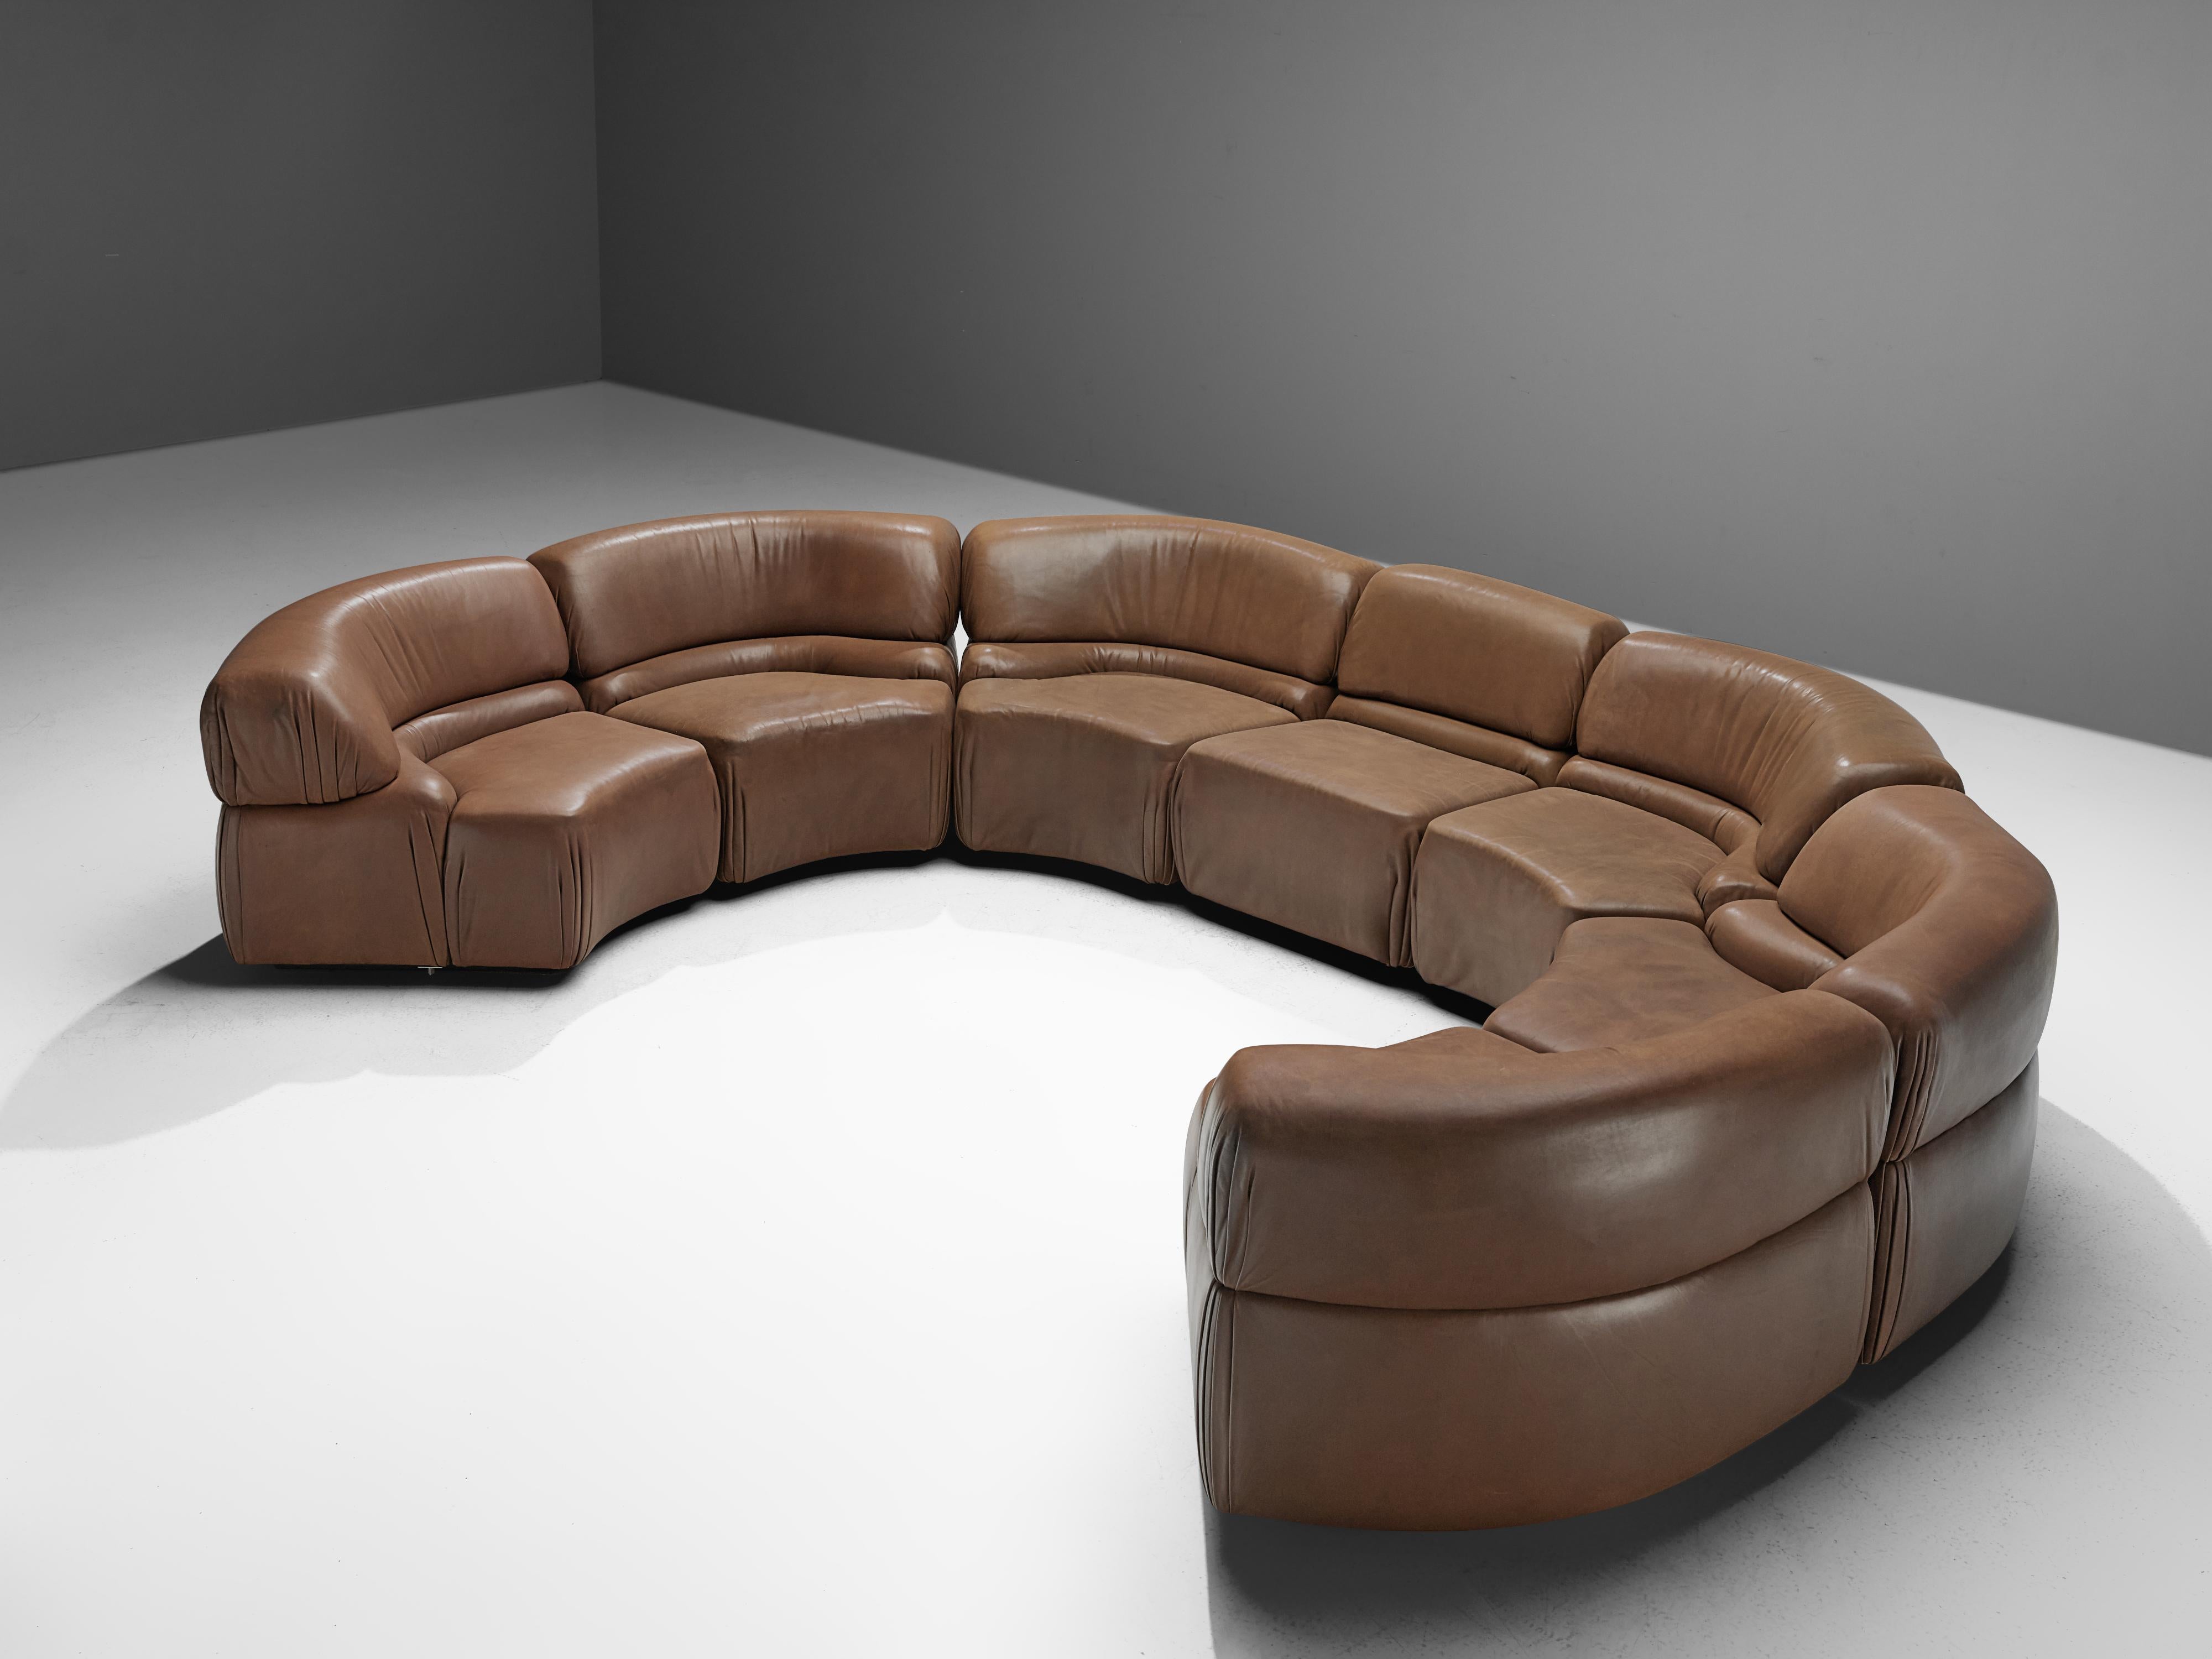 Late 20th Century De Sede Sectional Sofa 'Cosmos' in Brown Leather